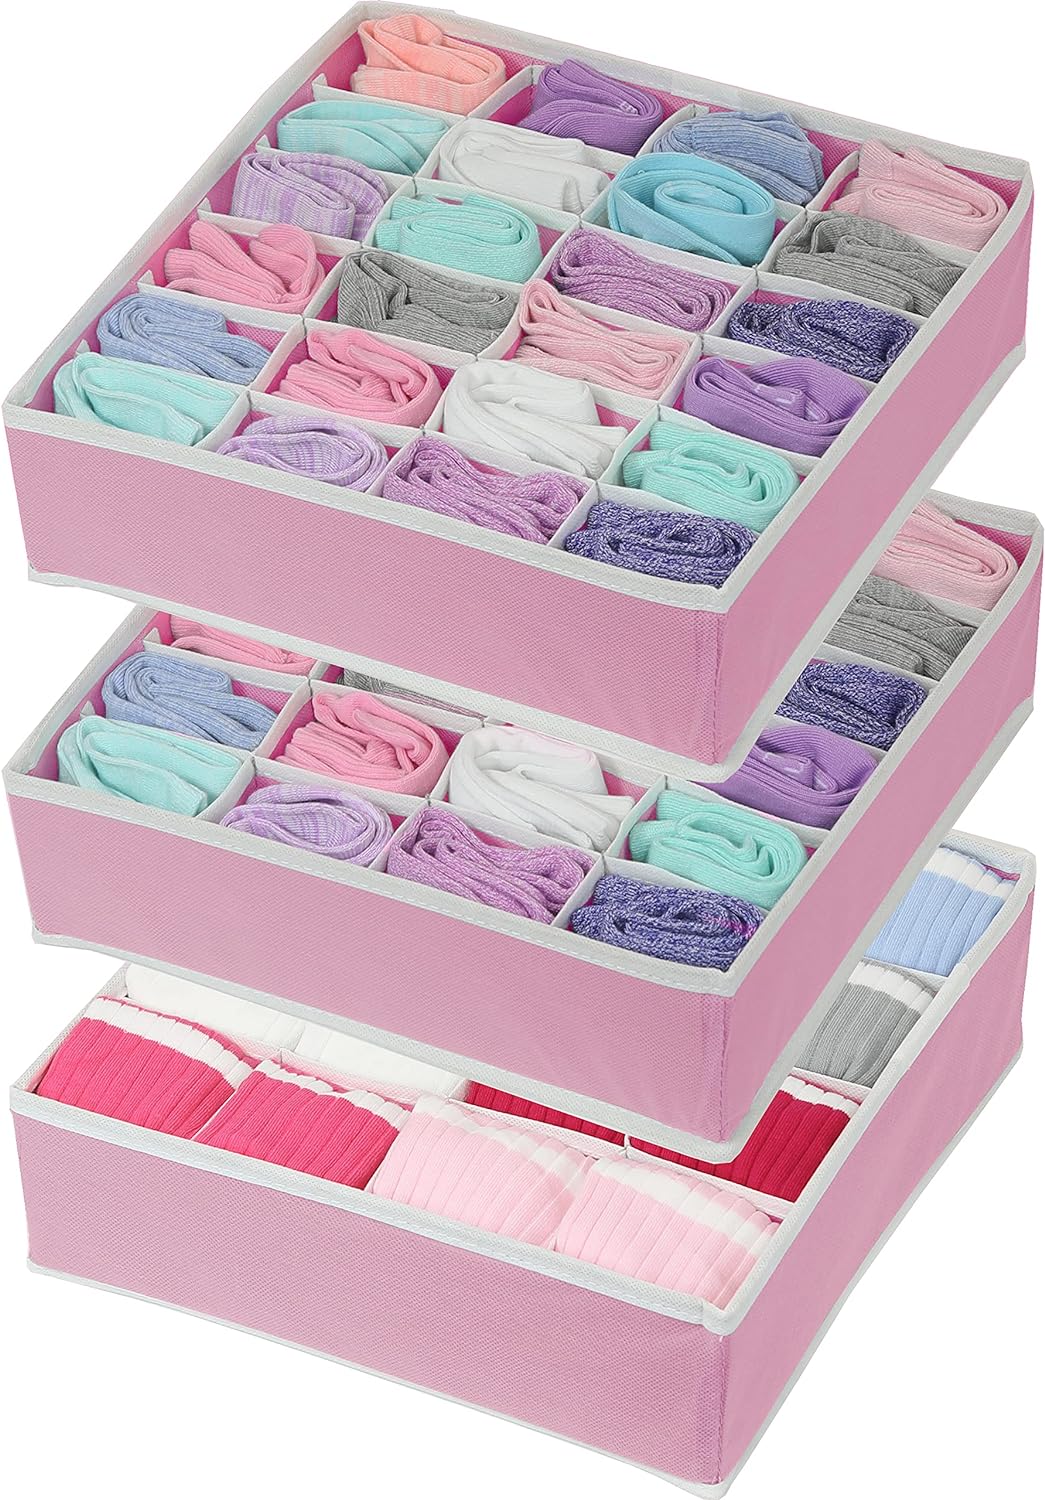 Simple Houseware Closet Drawer Organizer for Clothes, Socks and Underware, 3 Pack, Pink